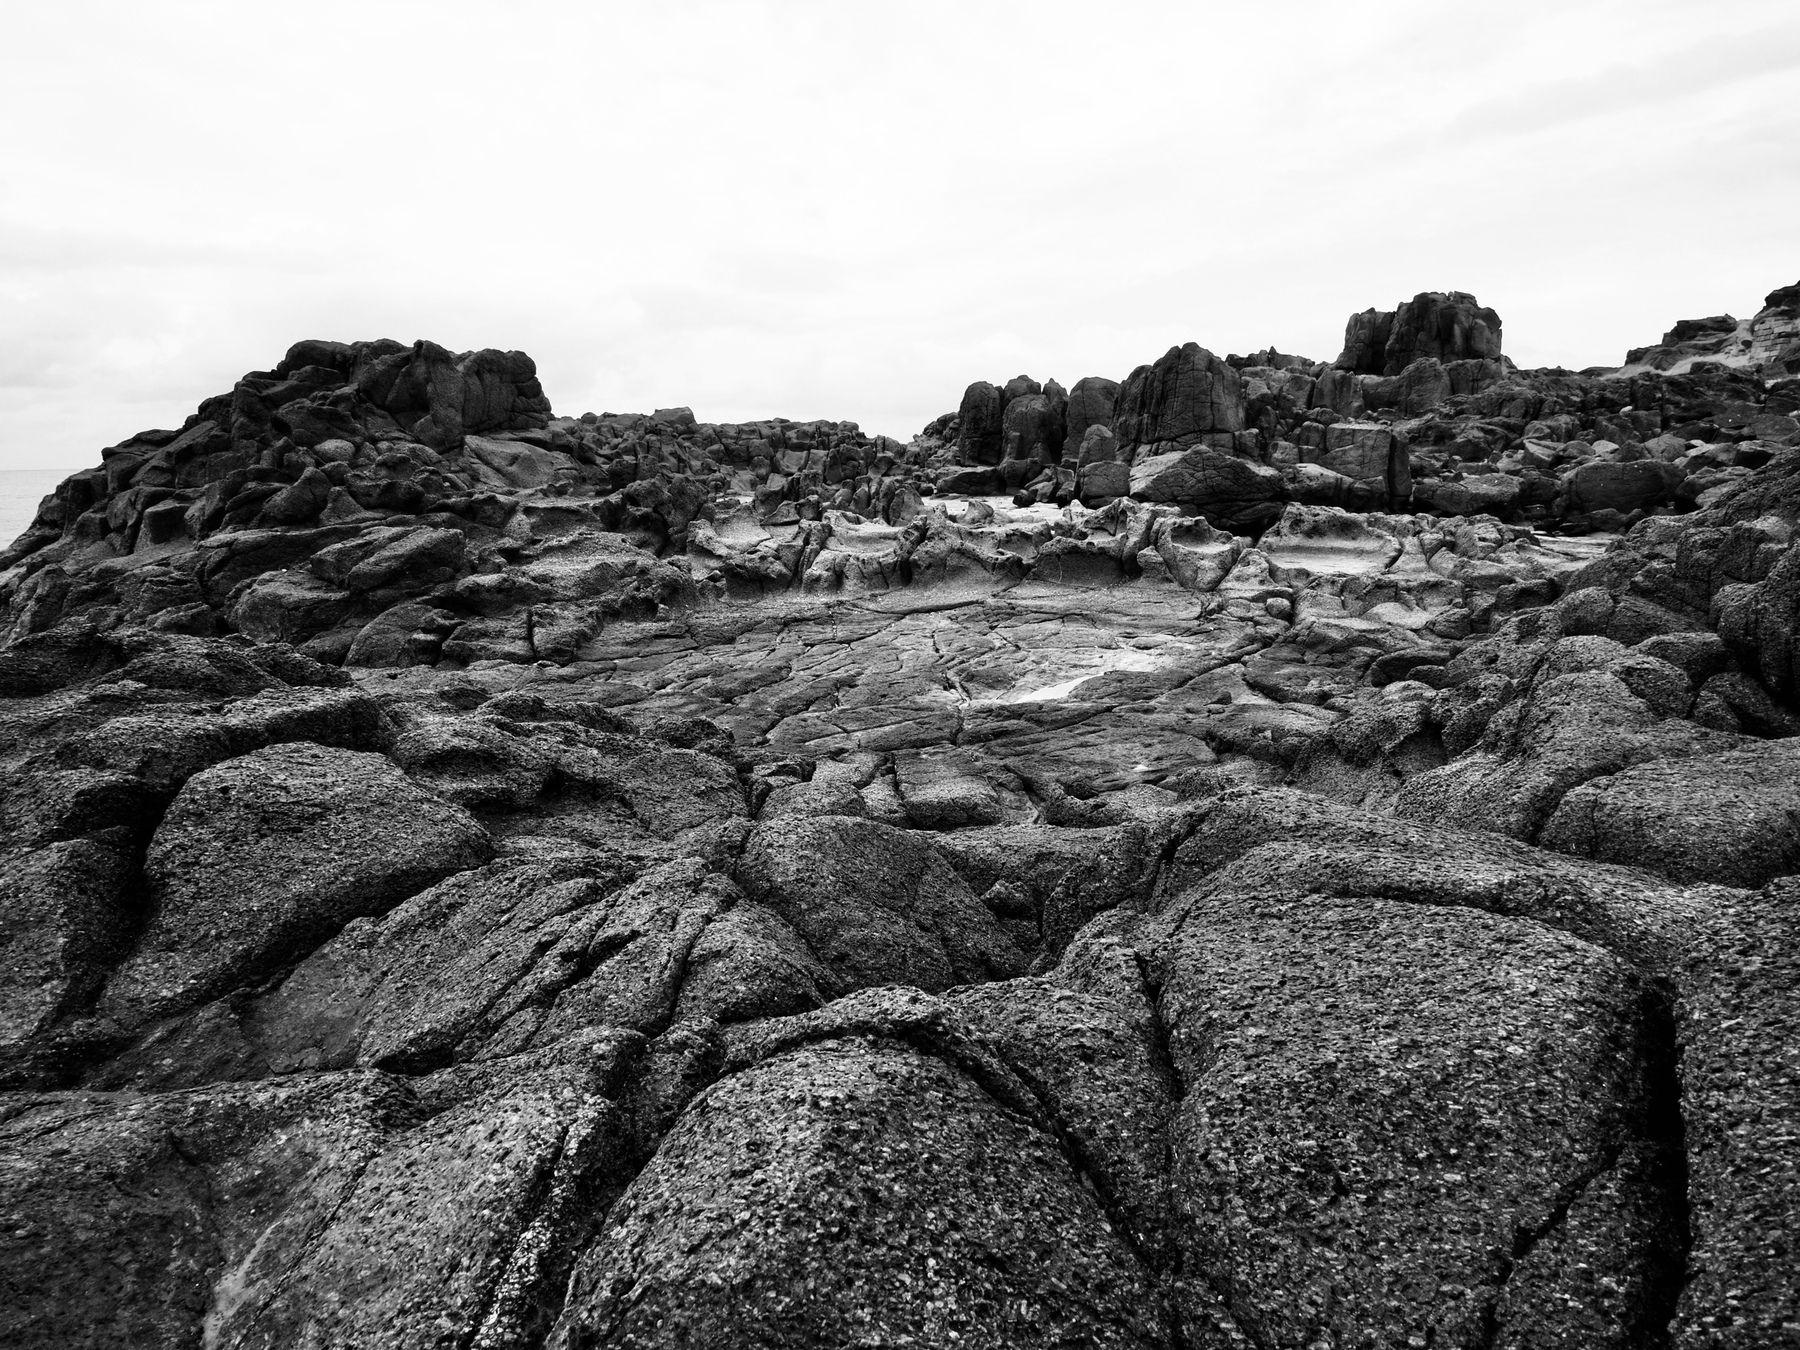 A black-and-white image of a rocky landscape